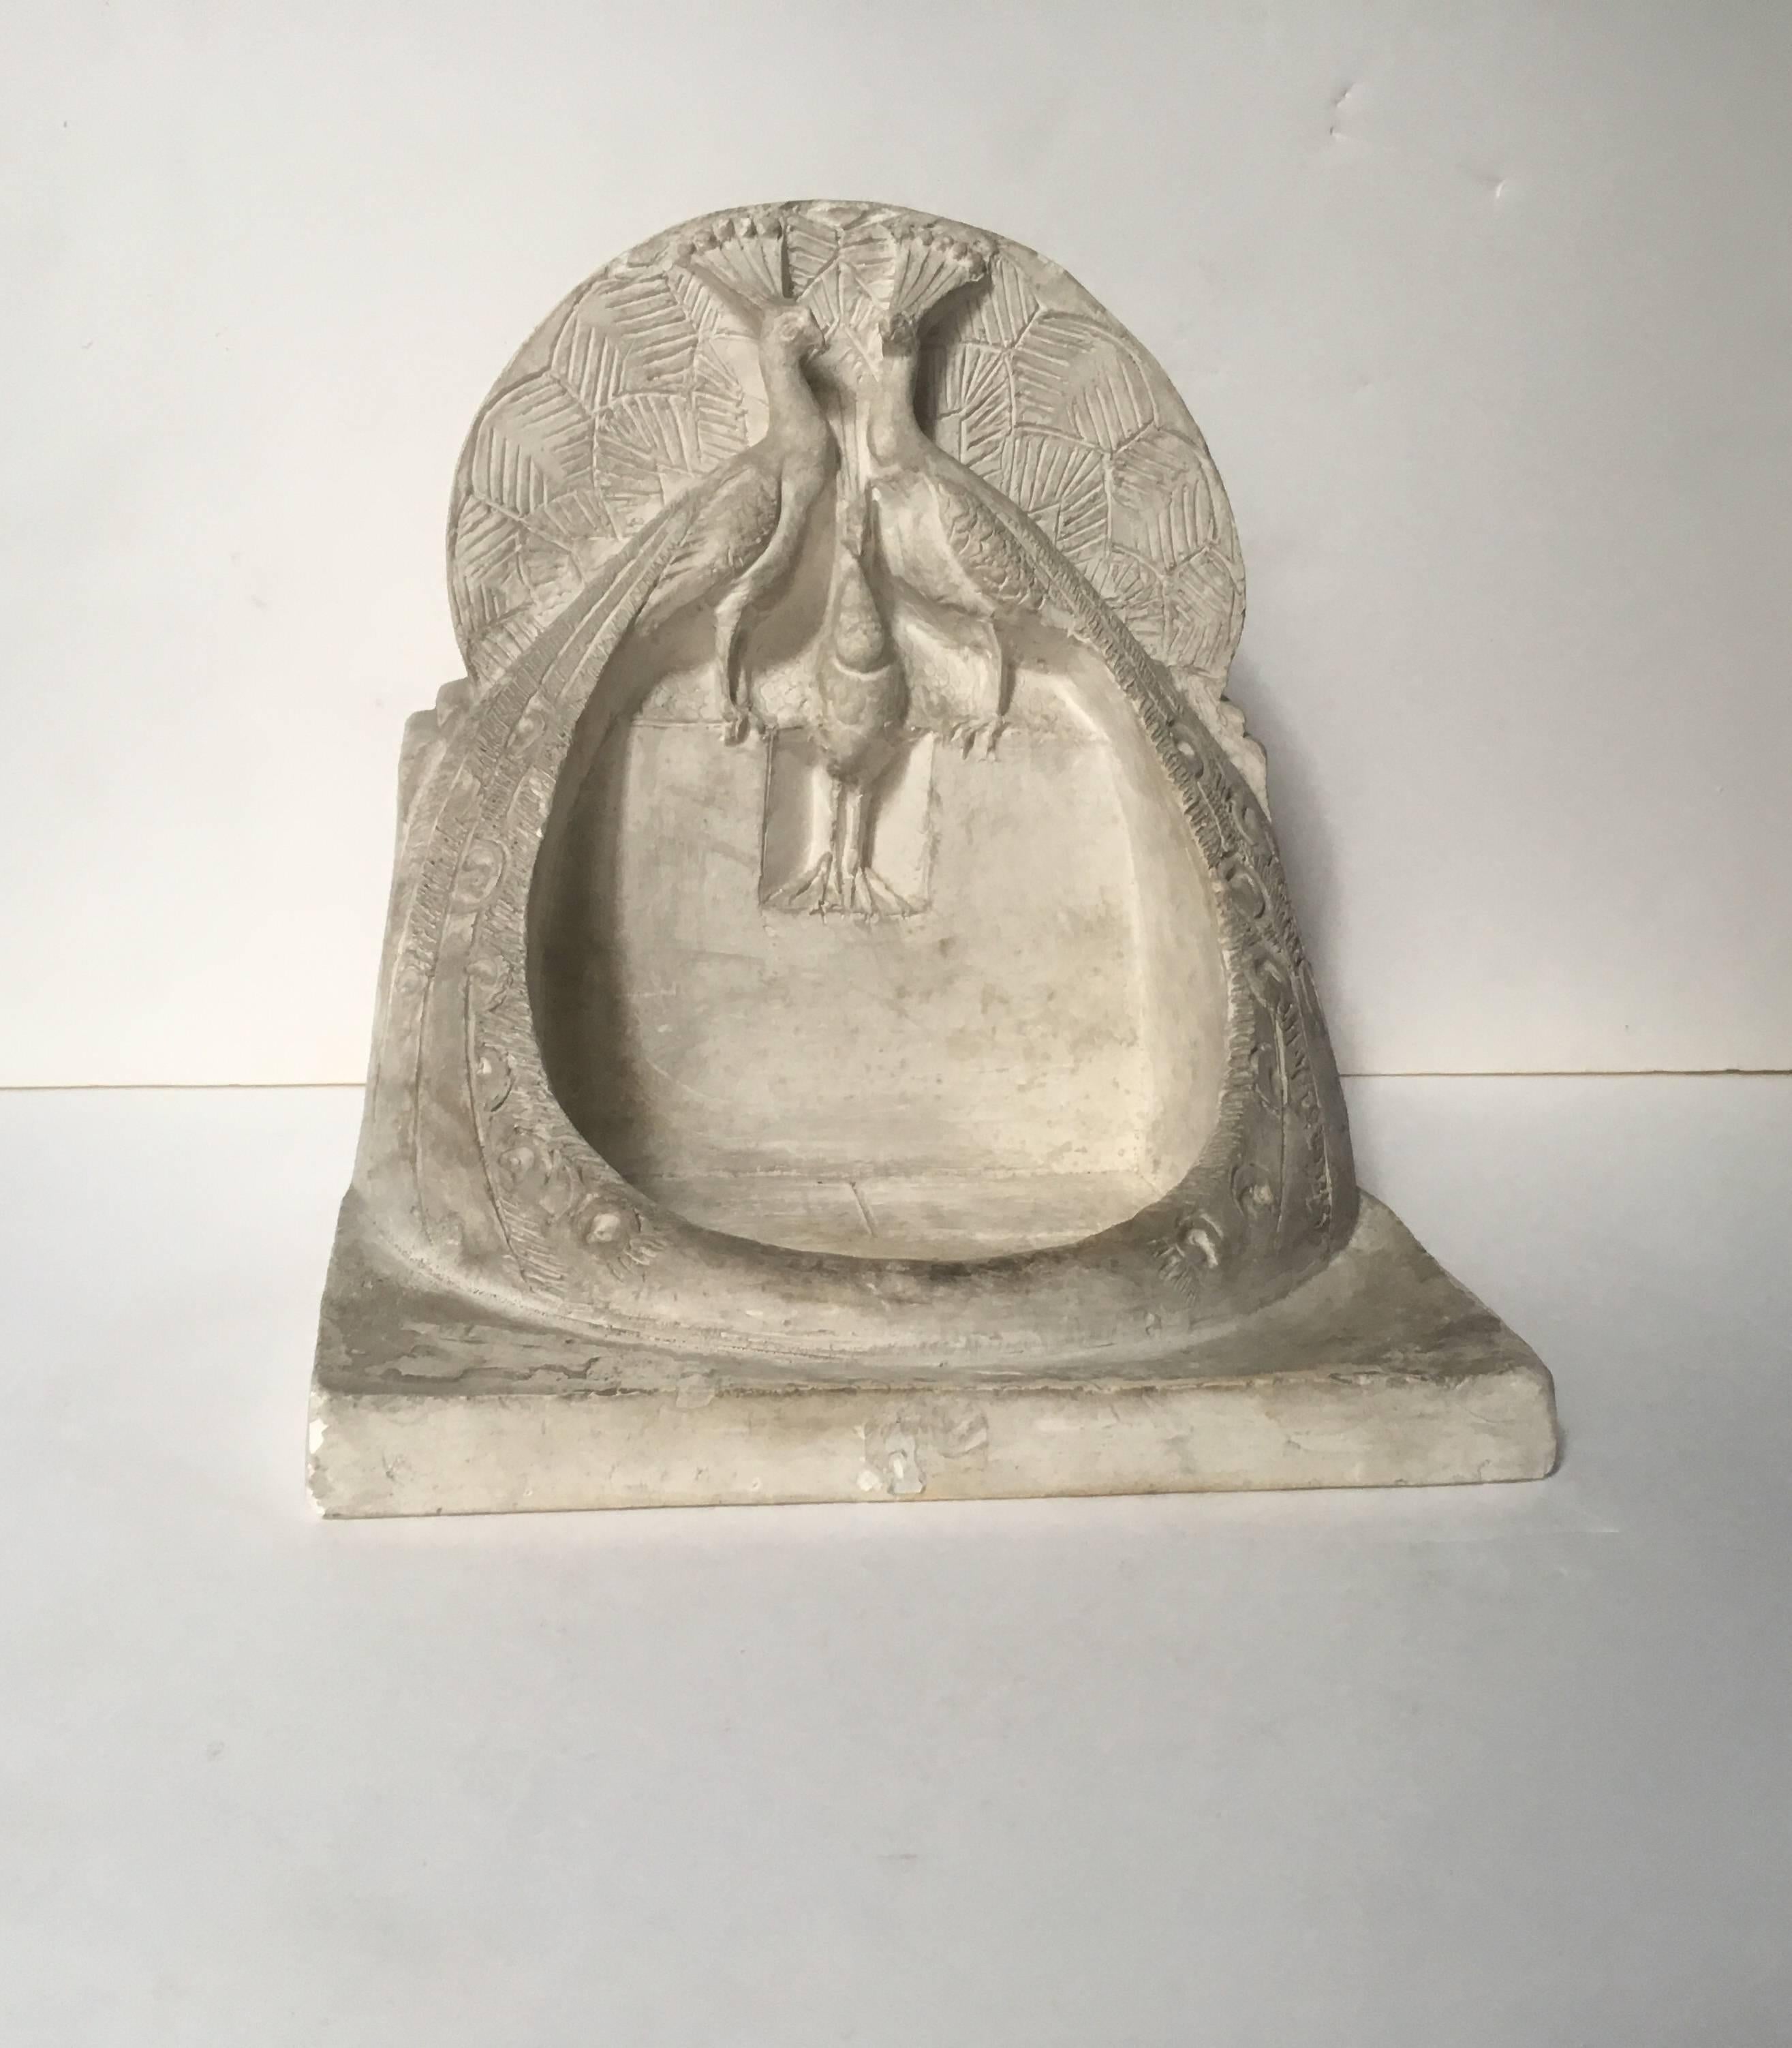 A circa 1940 sculpture model in plaster of a fountain by French painter and sculptor François d'Albignac (1903-1958).
Provenance guillaume le floc'h auction room sale of the artist François d'Albignac 22 march 2015.
 